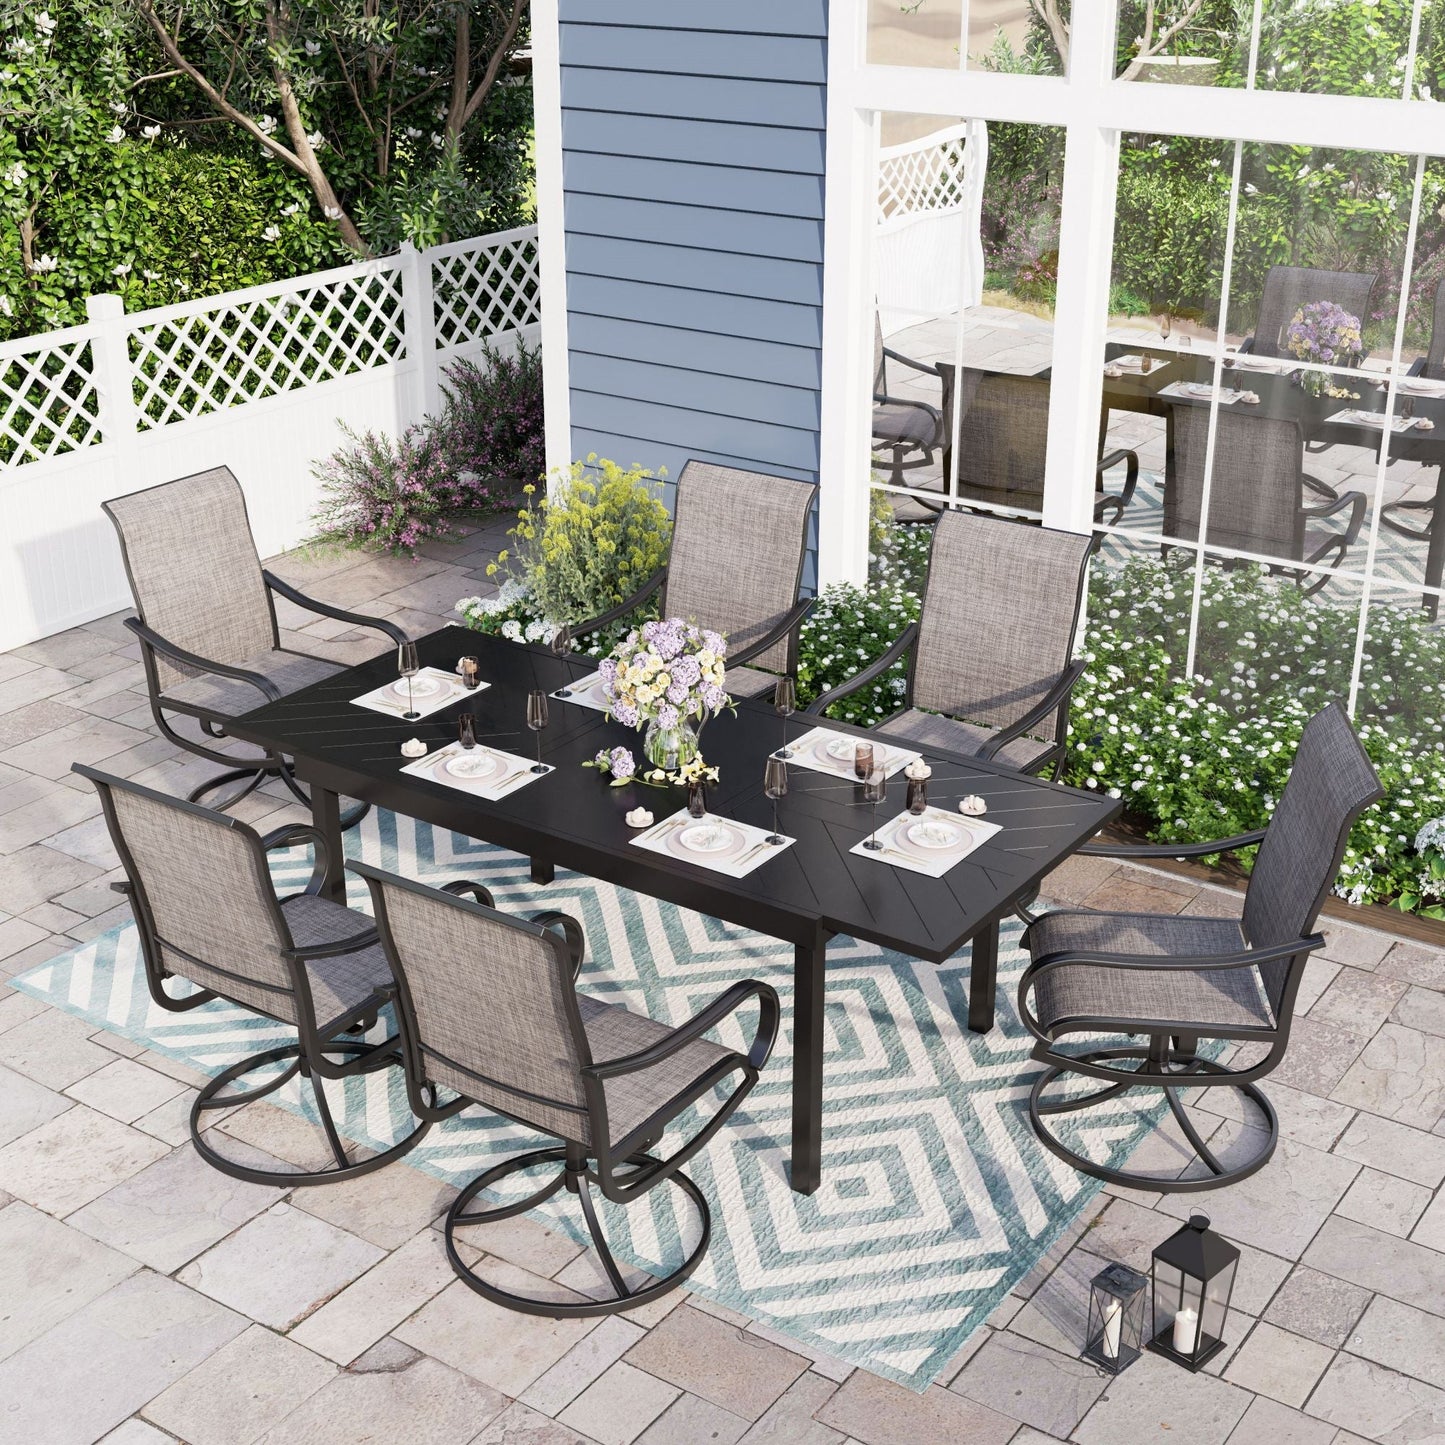 Sophia & William 7 Pieces Metal Outdoor Patio Dining Set with Textilene Swivel Chairs and Extendable Table